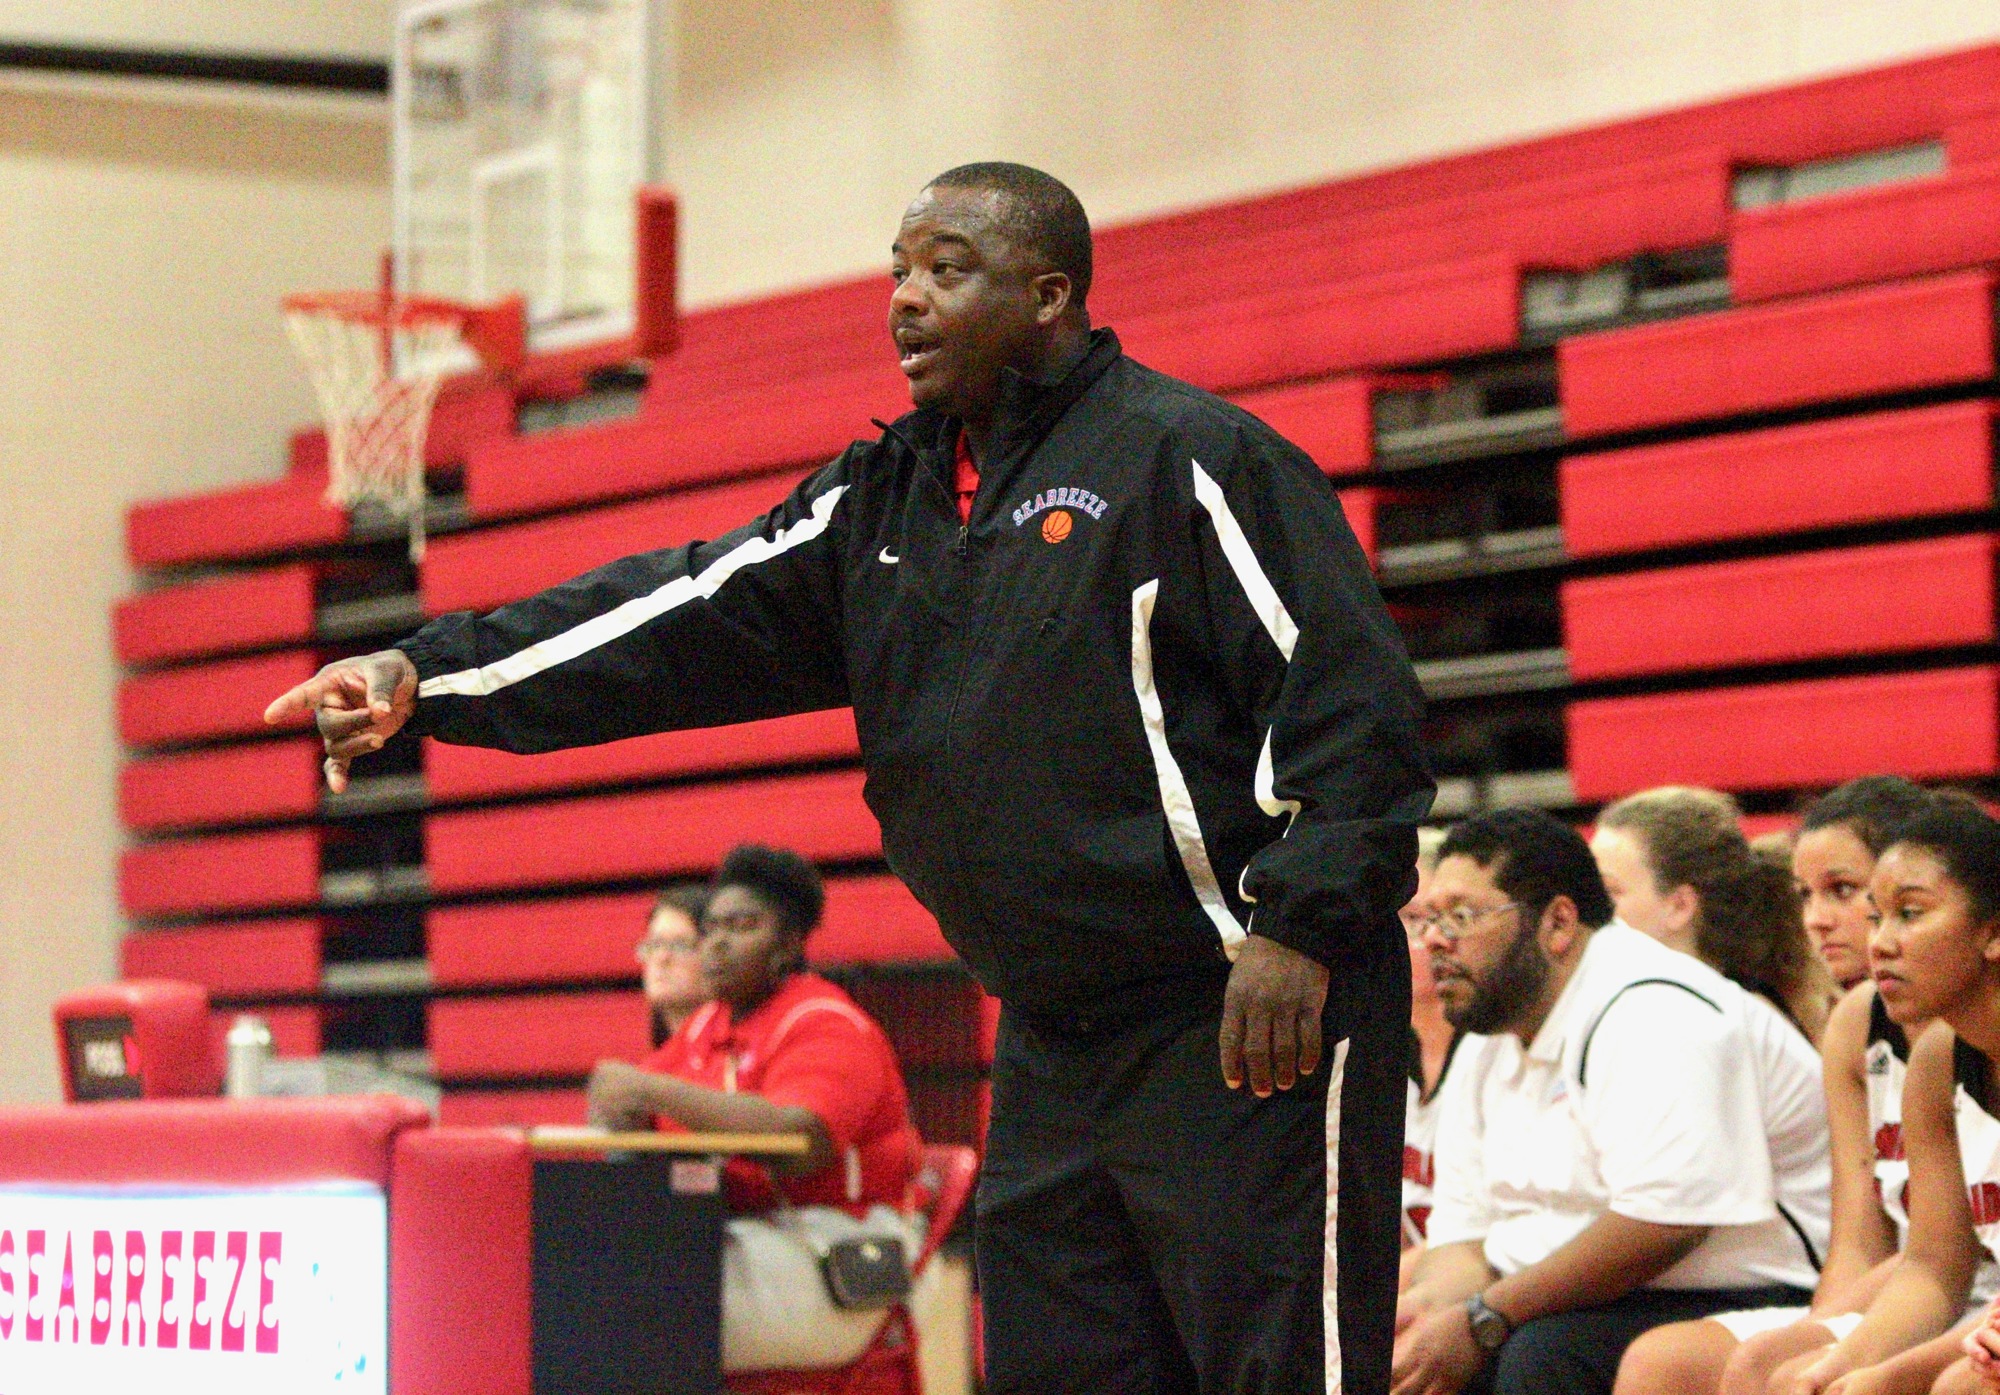 Seabreeze girls basketball coach Avery Randolph gives his team instructions from the bench. Photo by Ray Boone